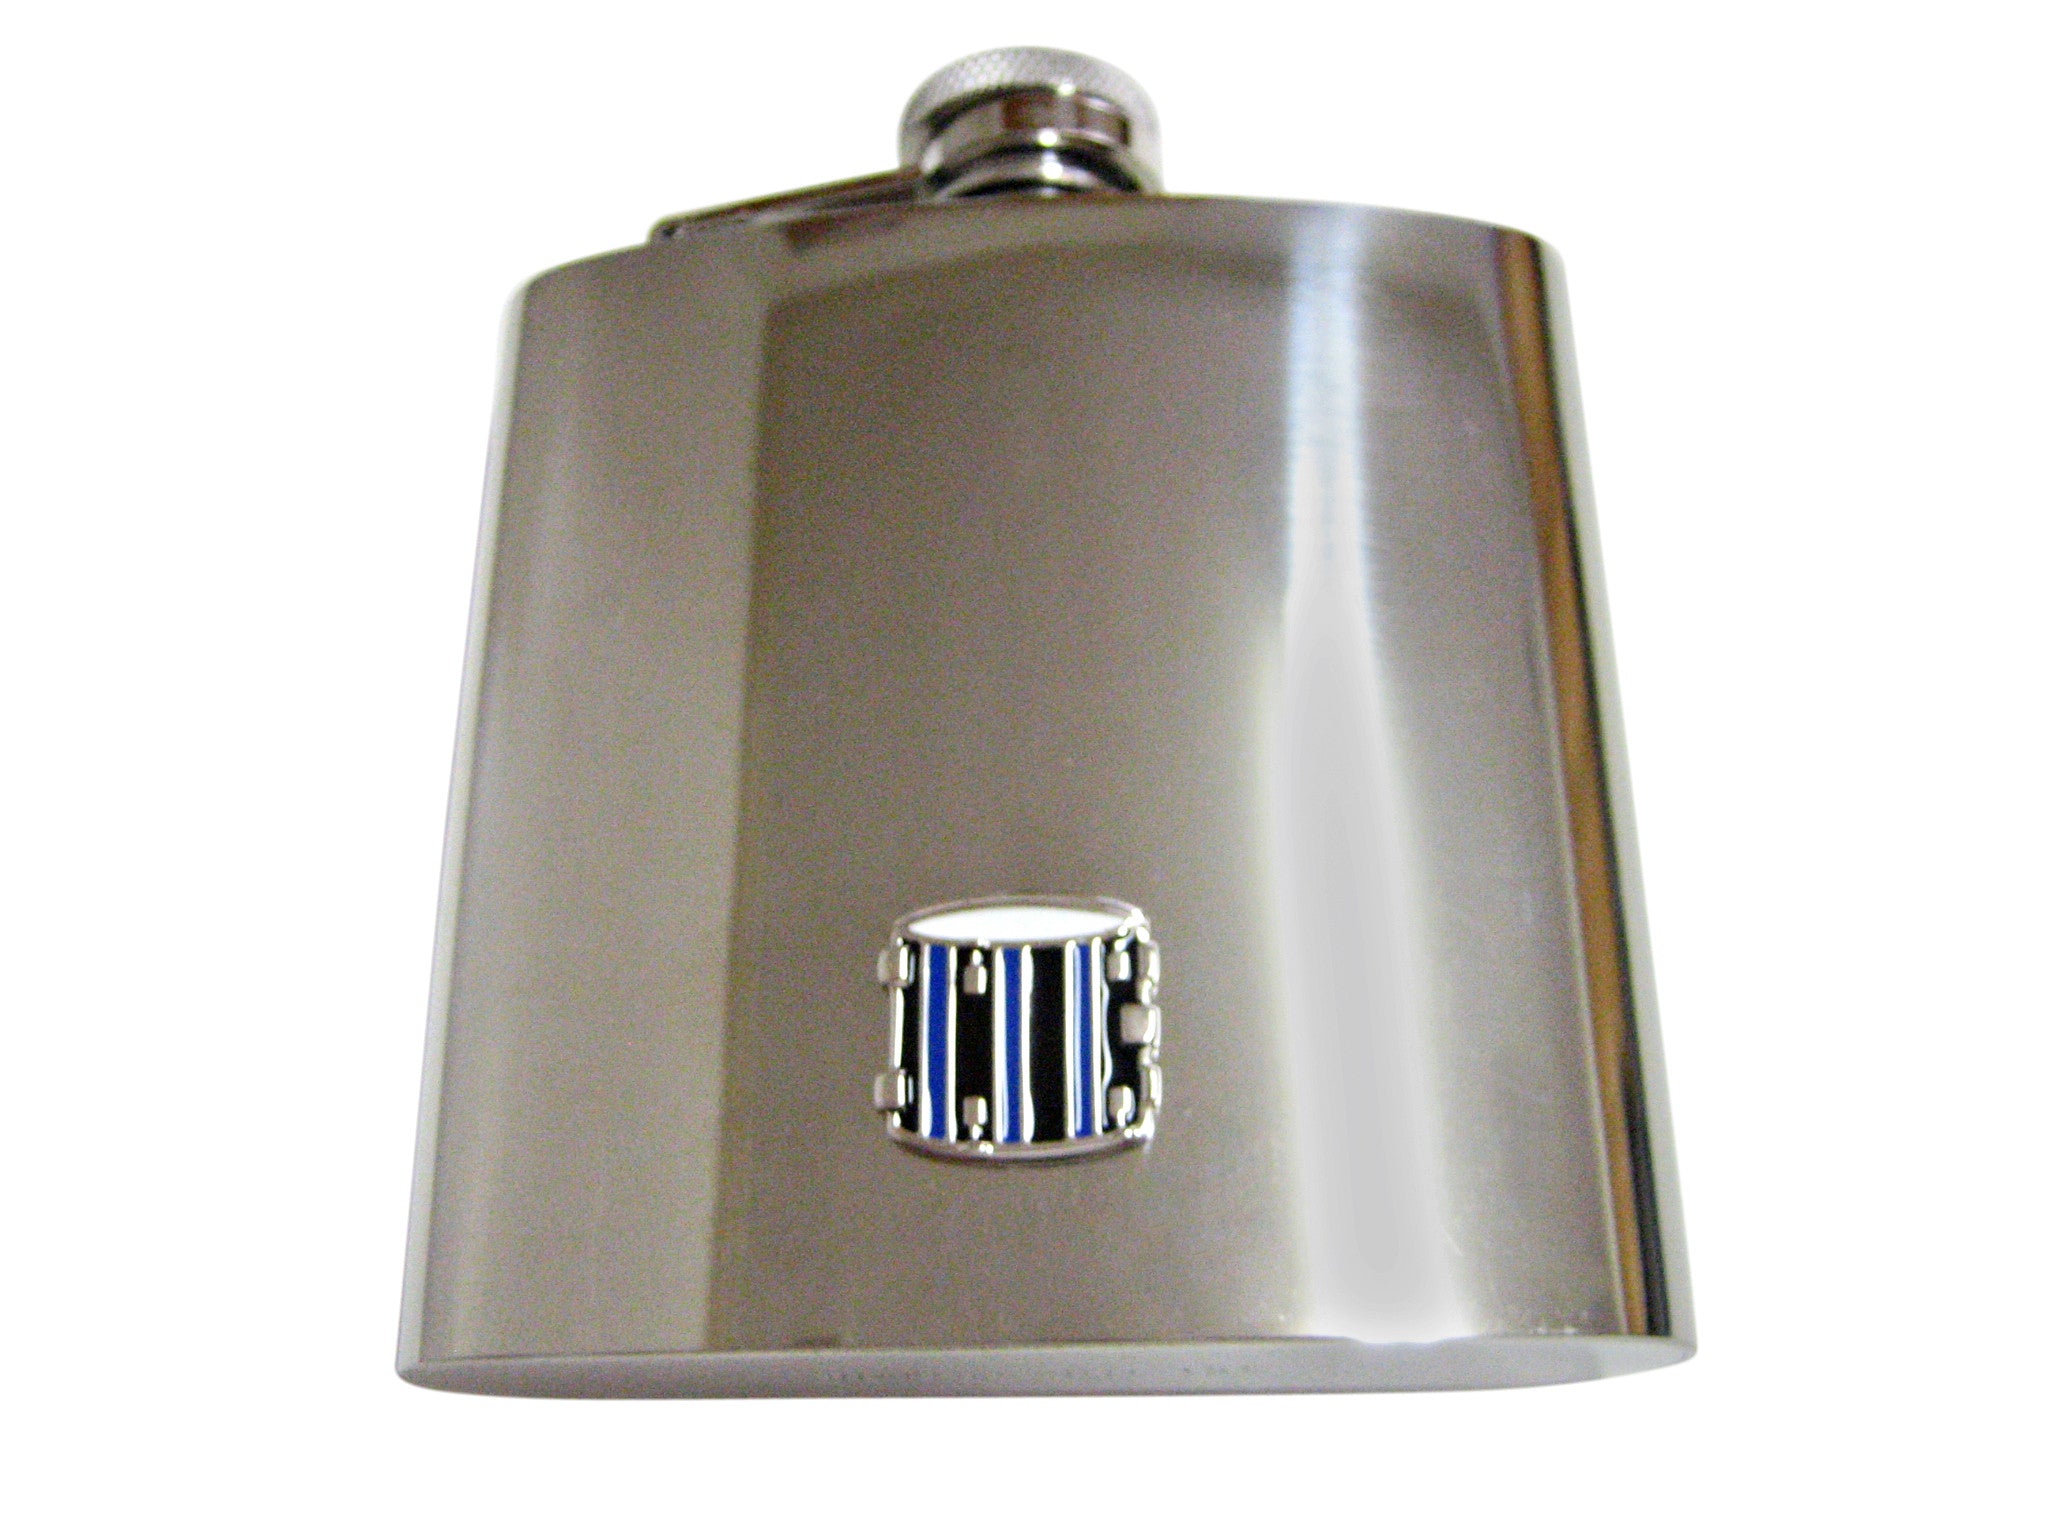 Blue and Black Toned Drum Musical Instrument 6 Oz. Stainless Steel Flask